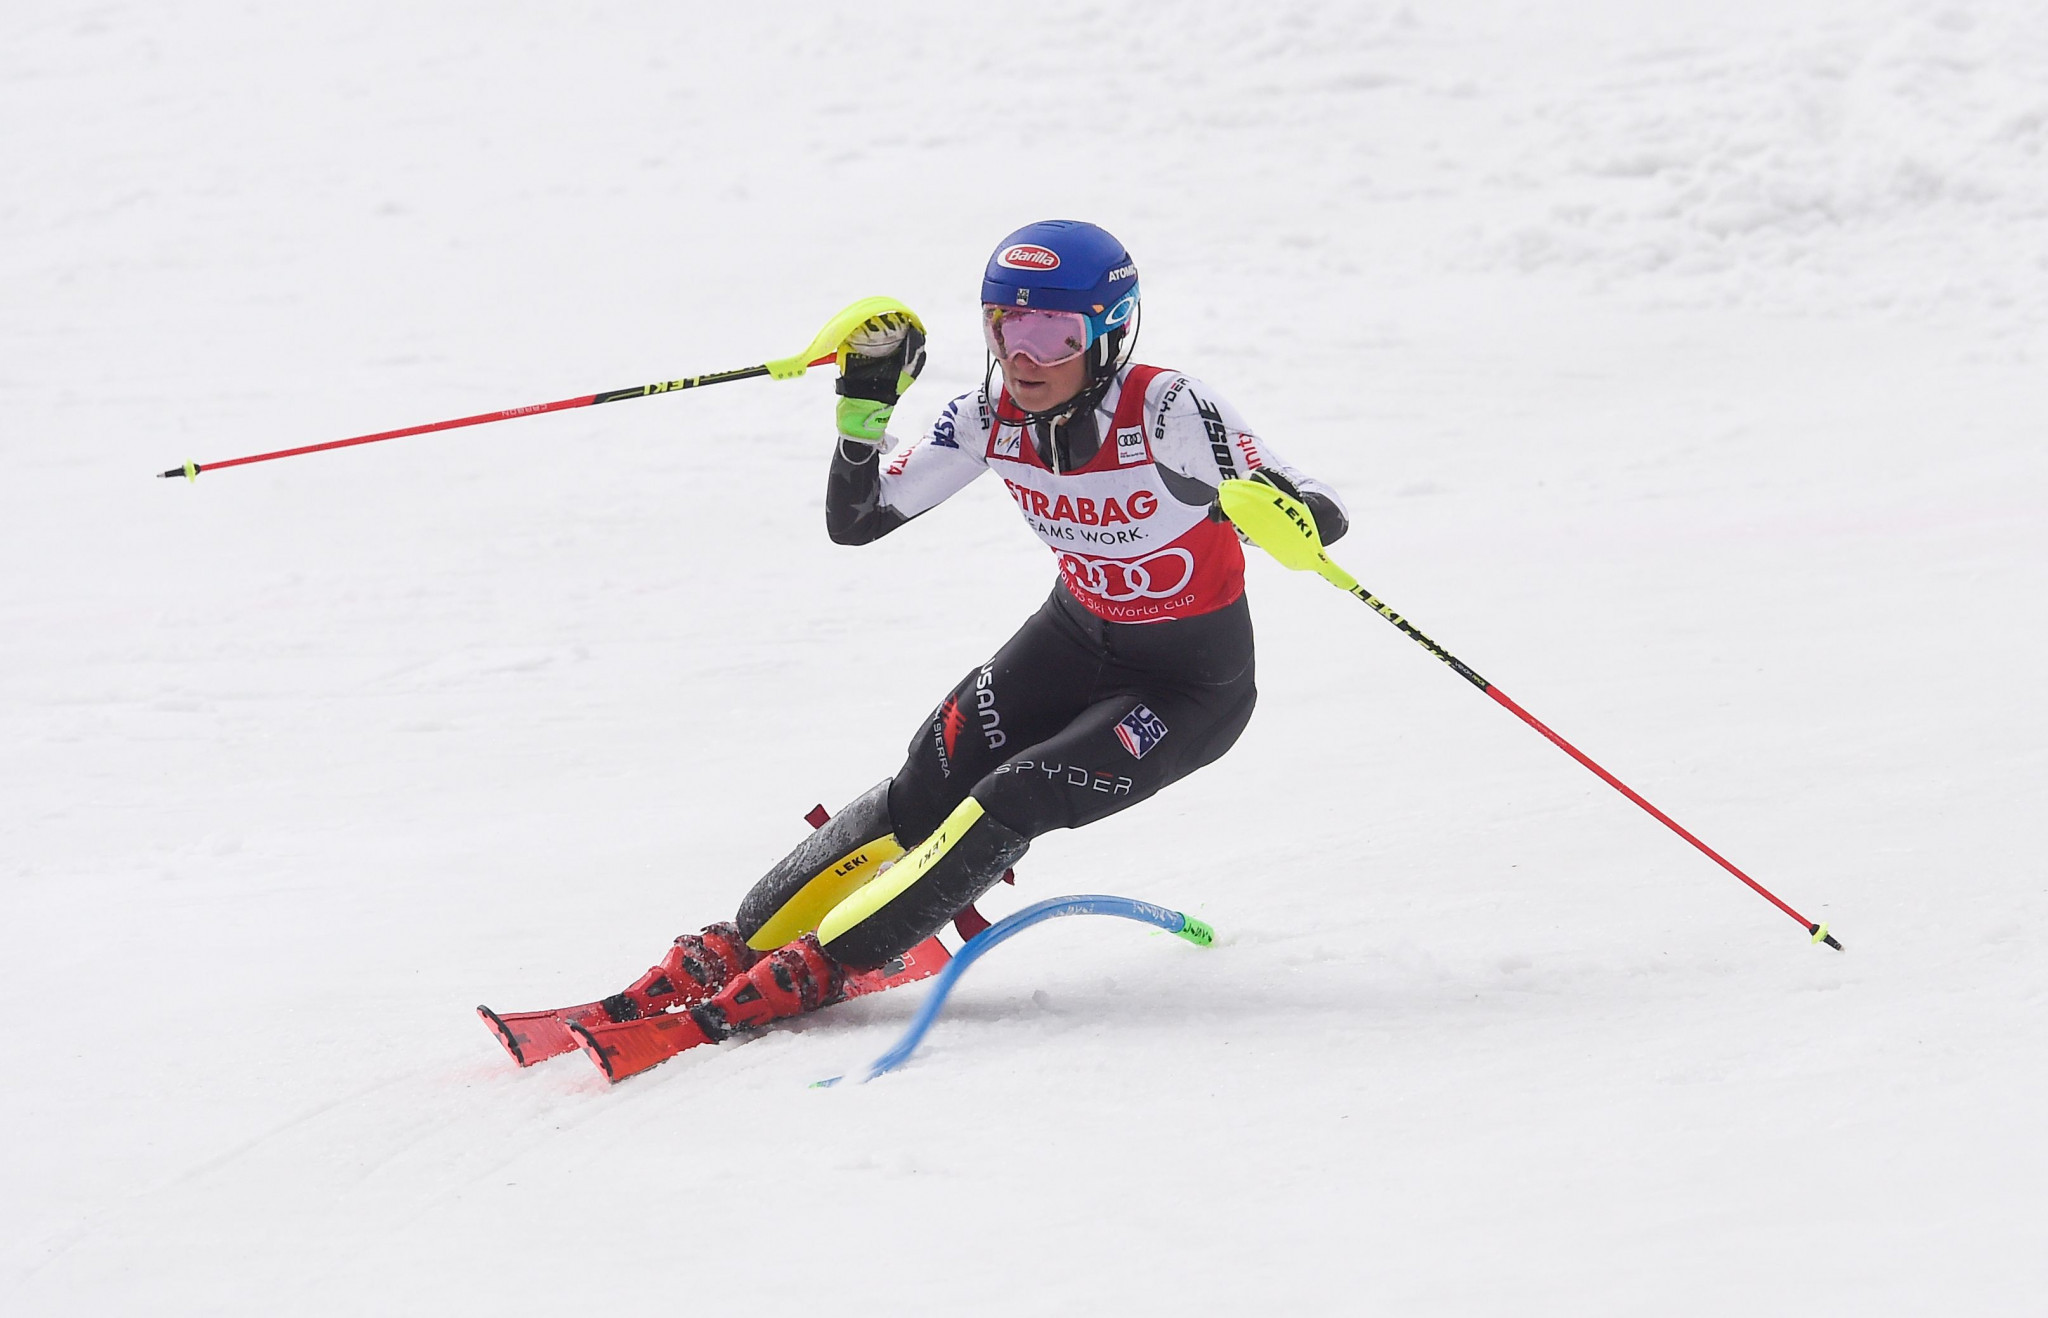 Shiffrin claims record-breaking 15th win of the season with slalom victory at FIS Alpine Skiing World Cup